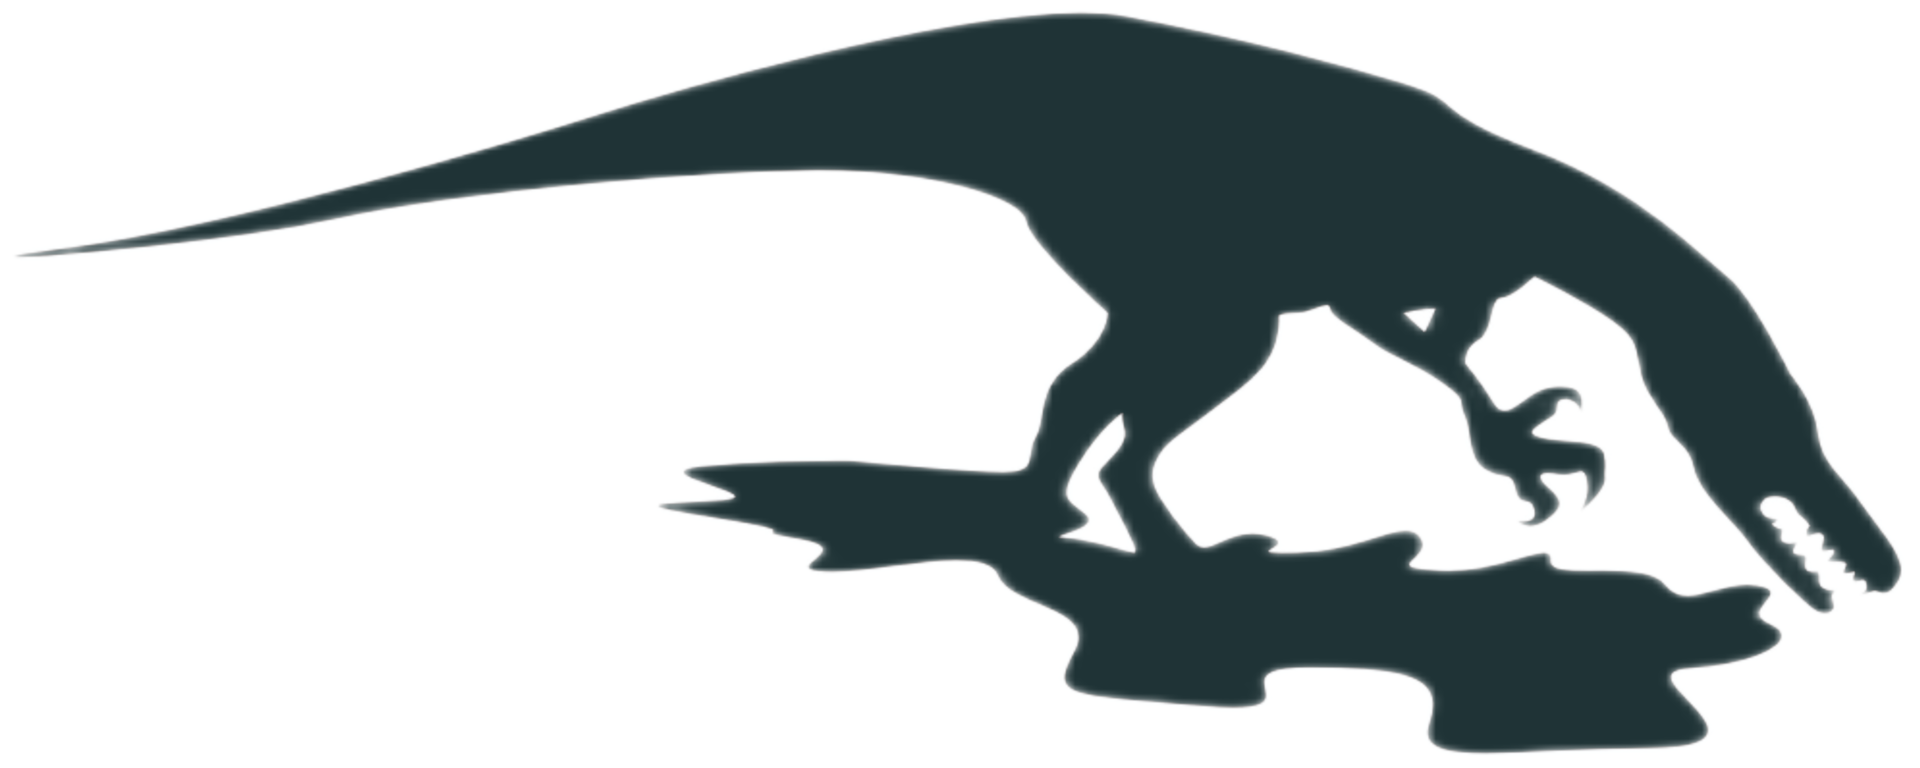 Tier - Dinosaurier-Silhouette png